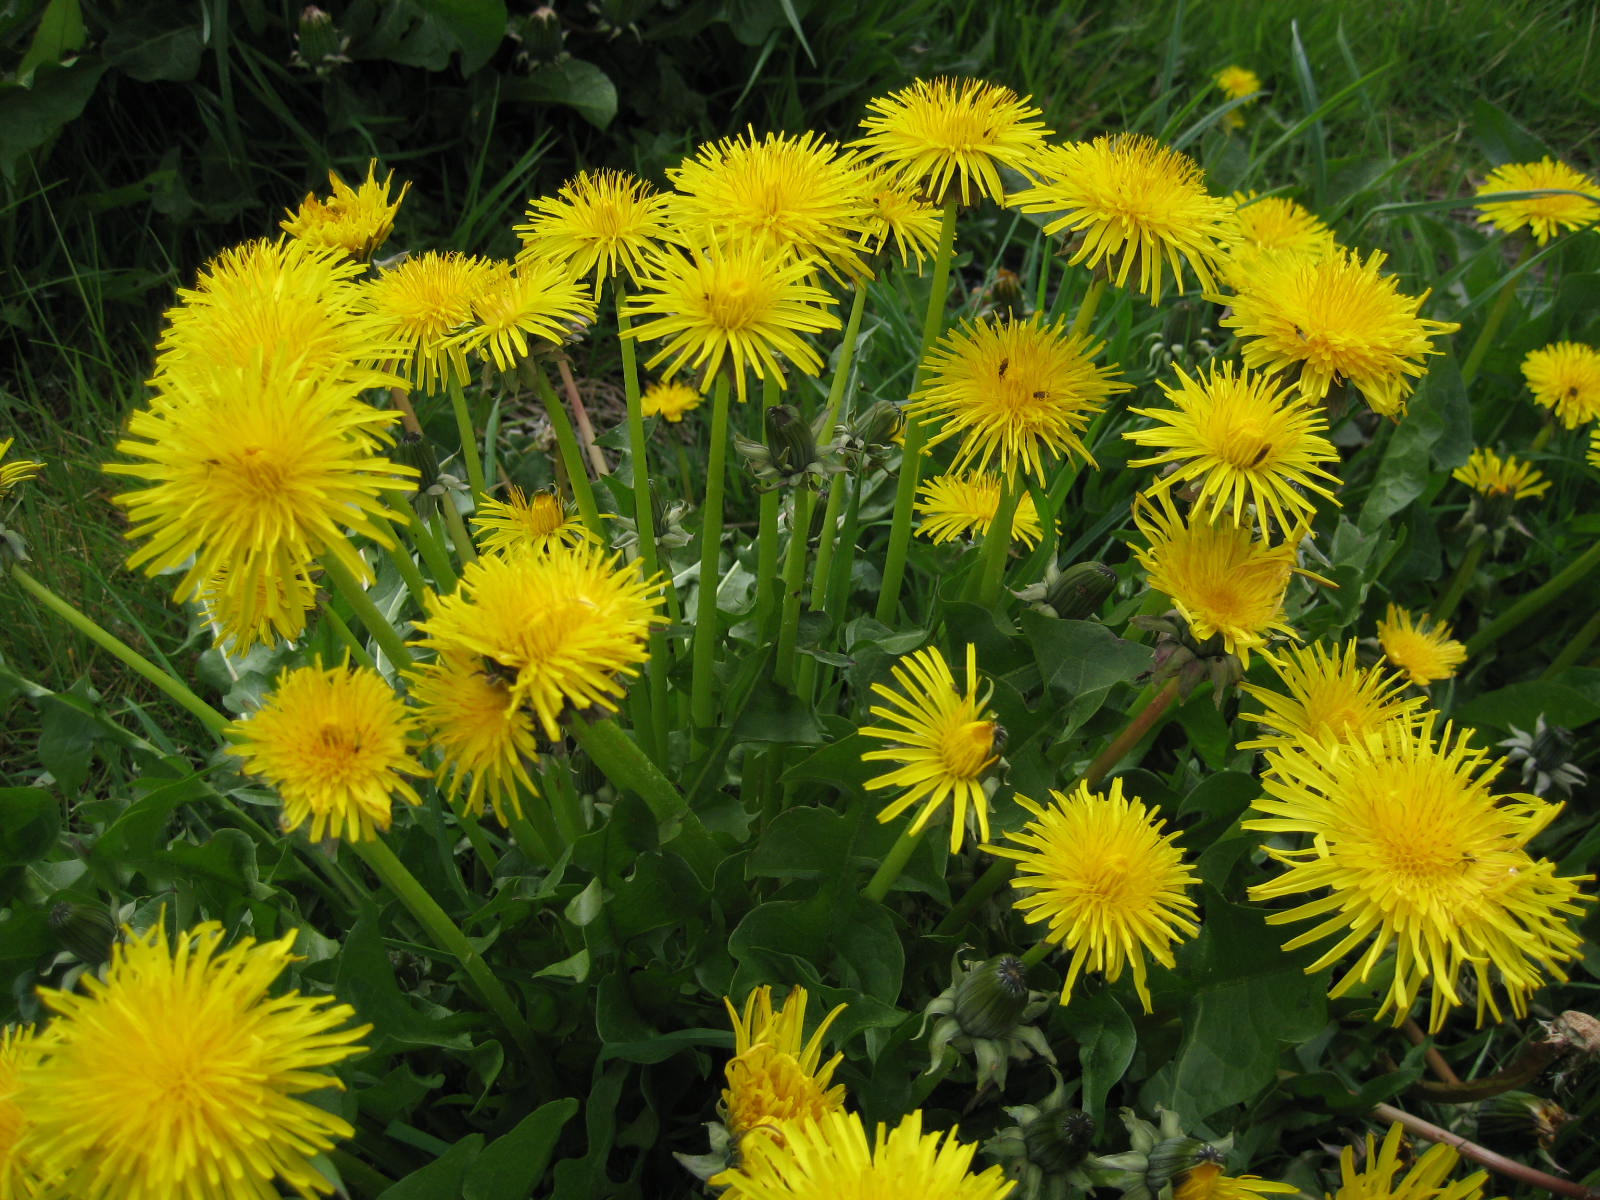 Make your own dandelion oil and salve